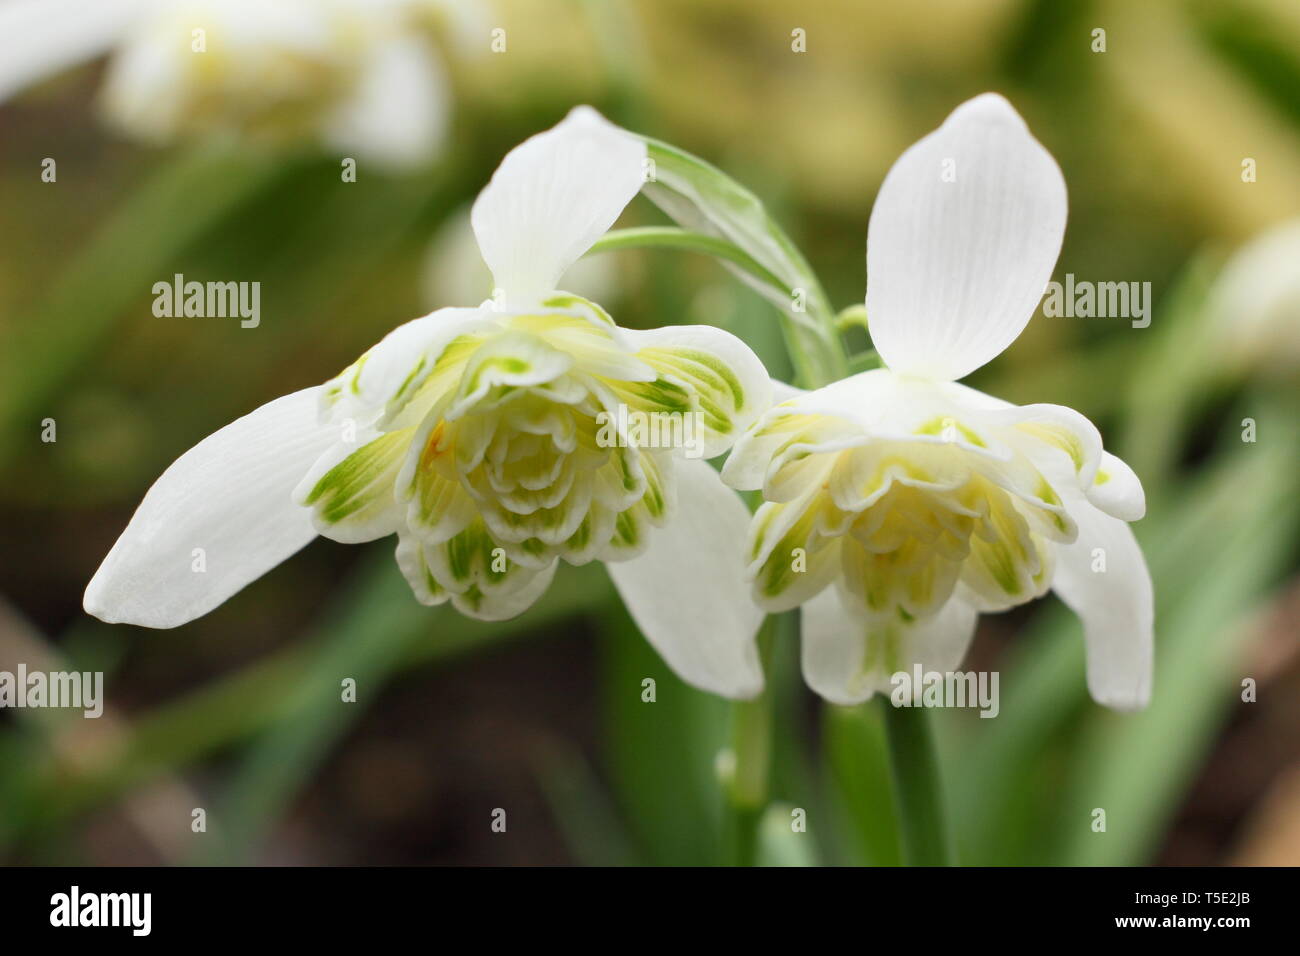 Galanthus nivalis f. pleniflorus 'Lady Elphinstone'. Characteristic double blooms and yellow markings of Lady Elphinstone snowdrop - February, UK Stock Photo